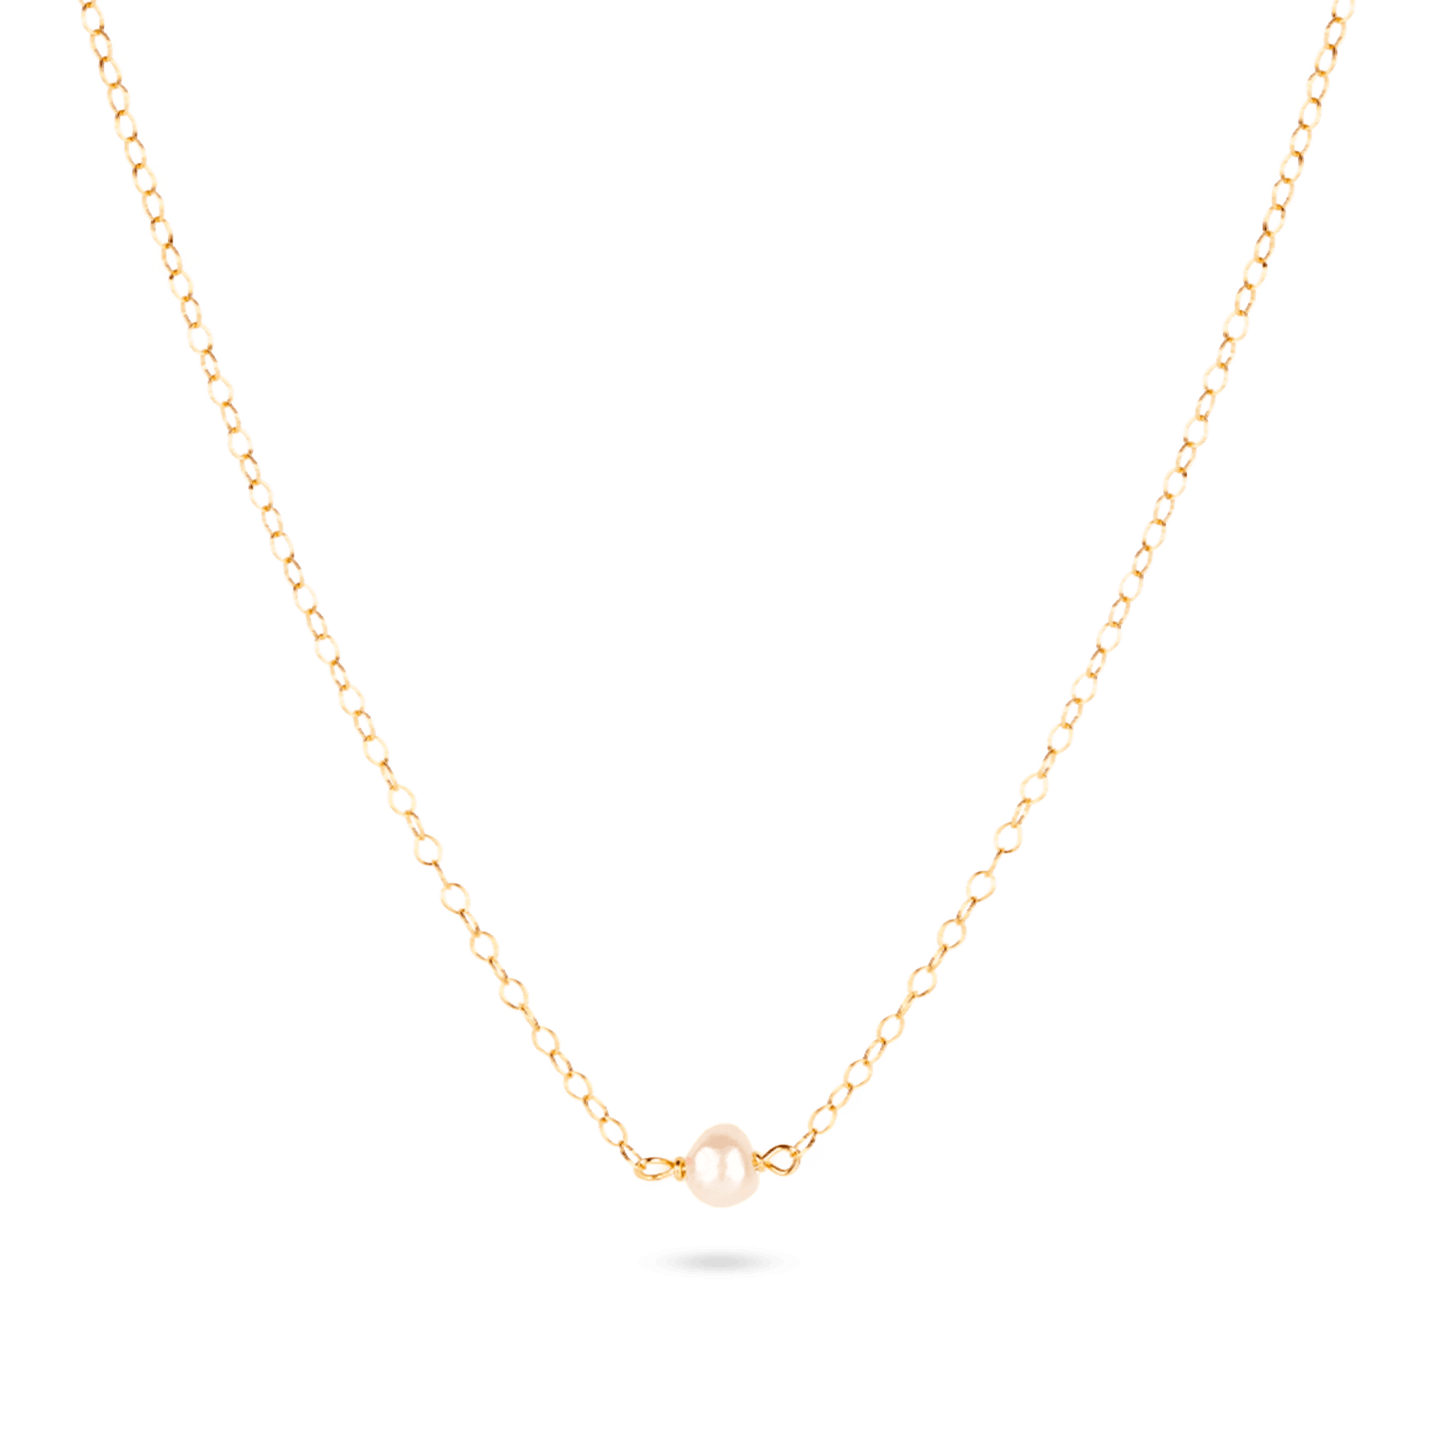 Stone and Strand Dainty Twist Necklace Extender